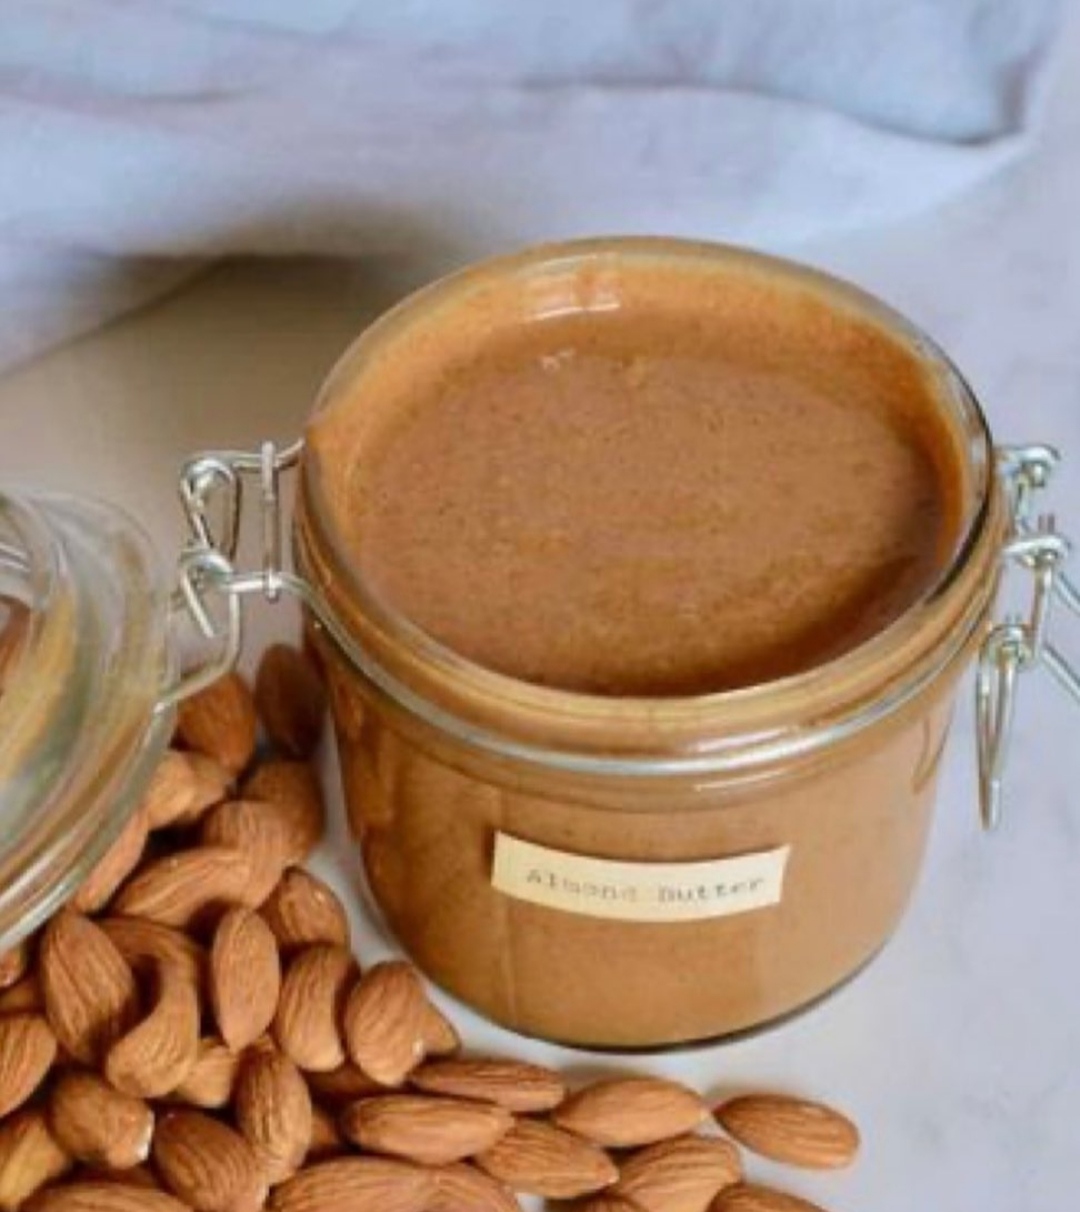 Almond butter offers numerous benefits: